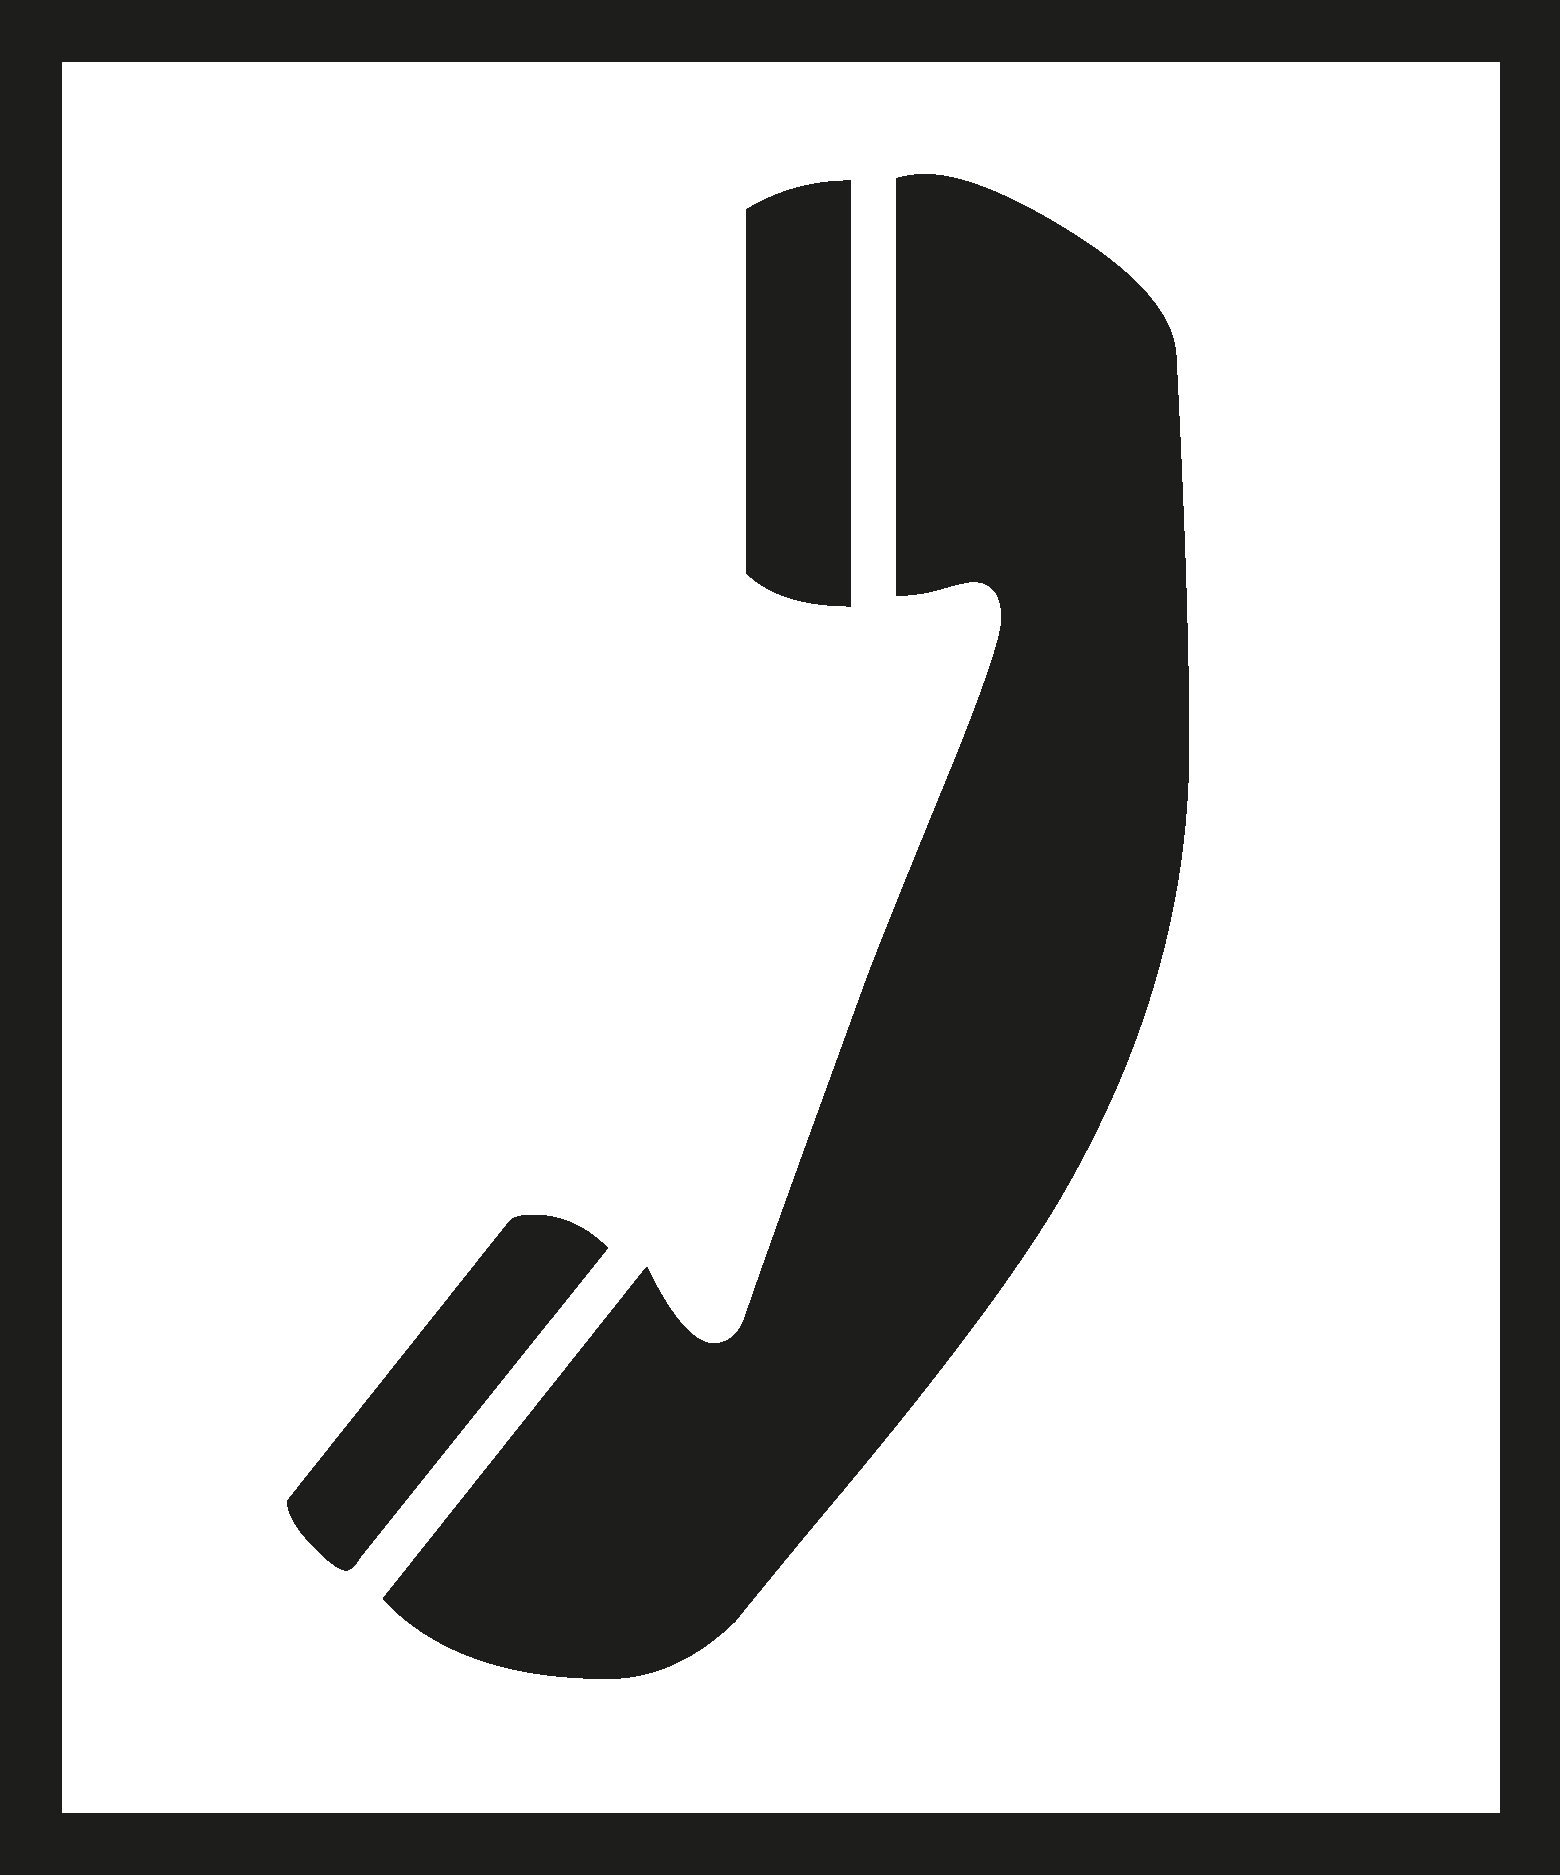 Telephone Vector Icons free download in SVG, PNG Format